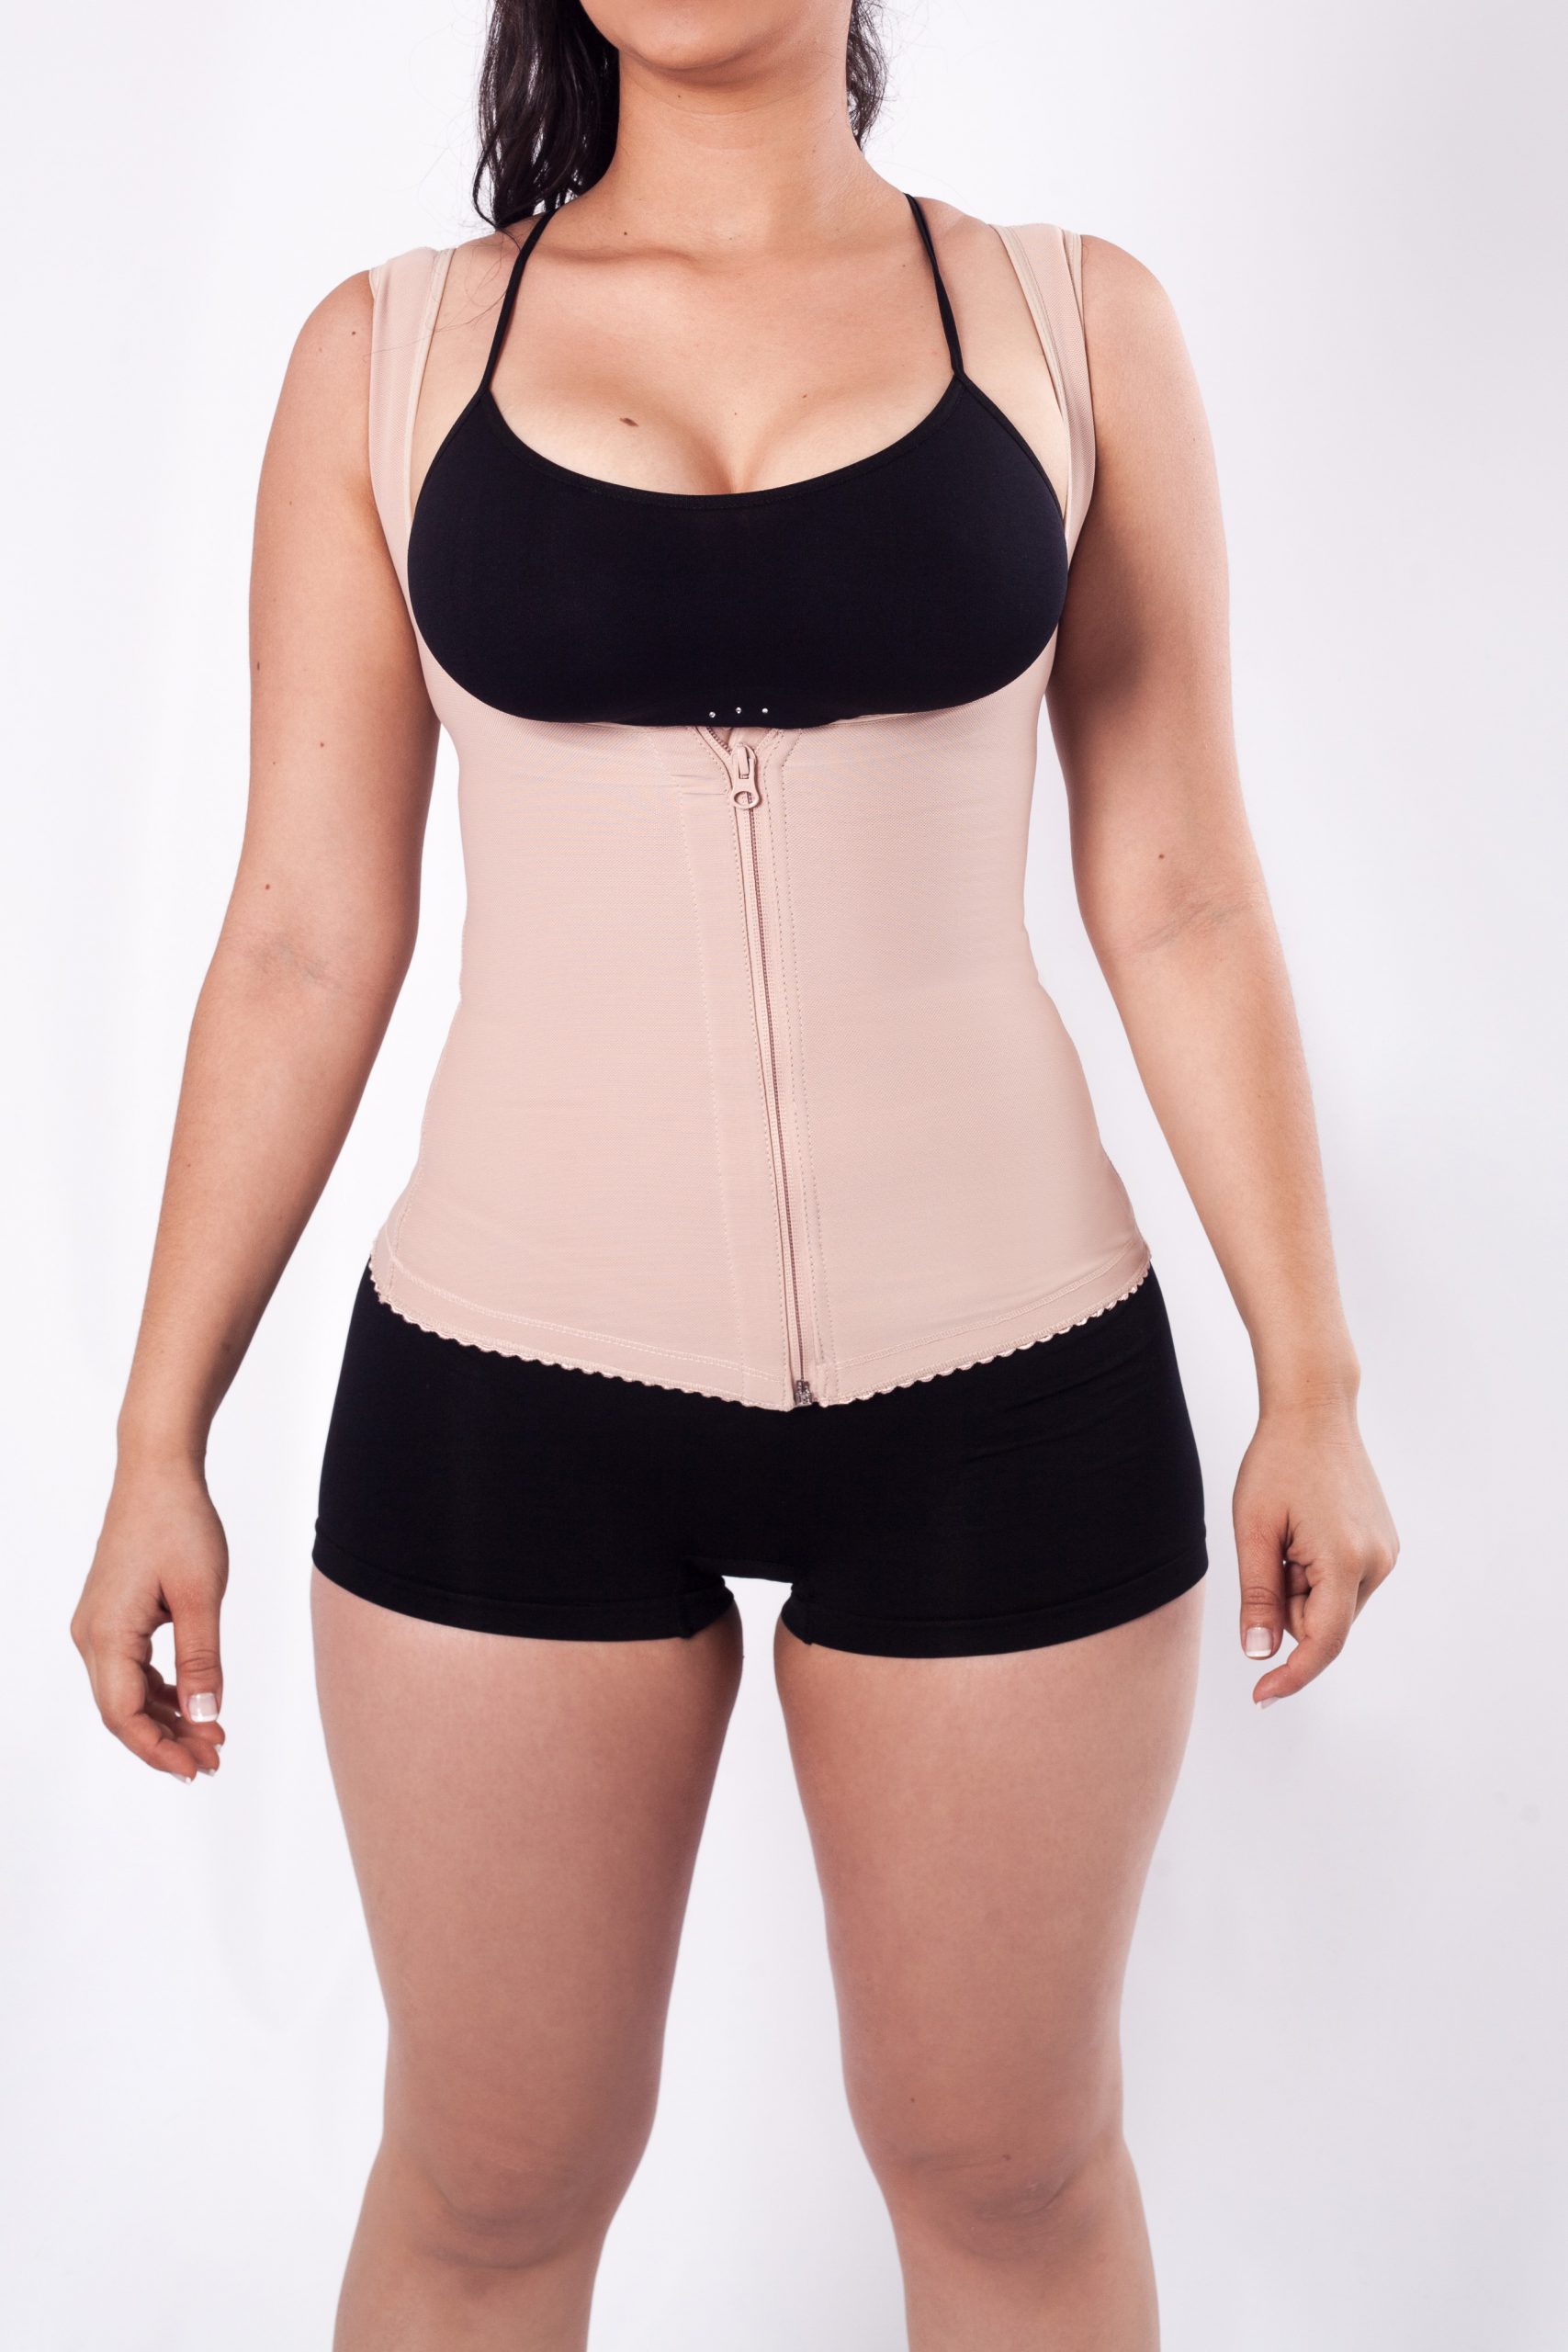 Powernet vest waist training with rods